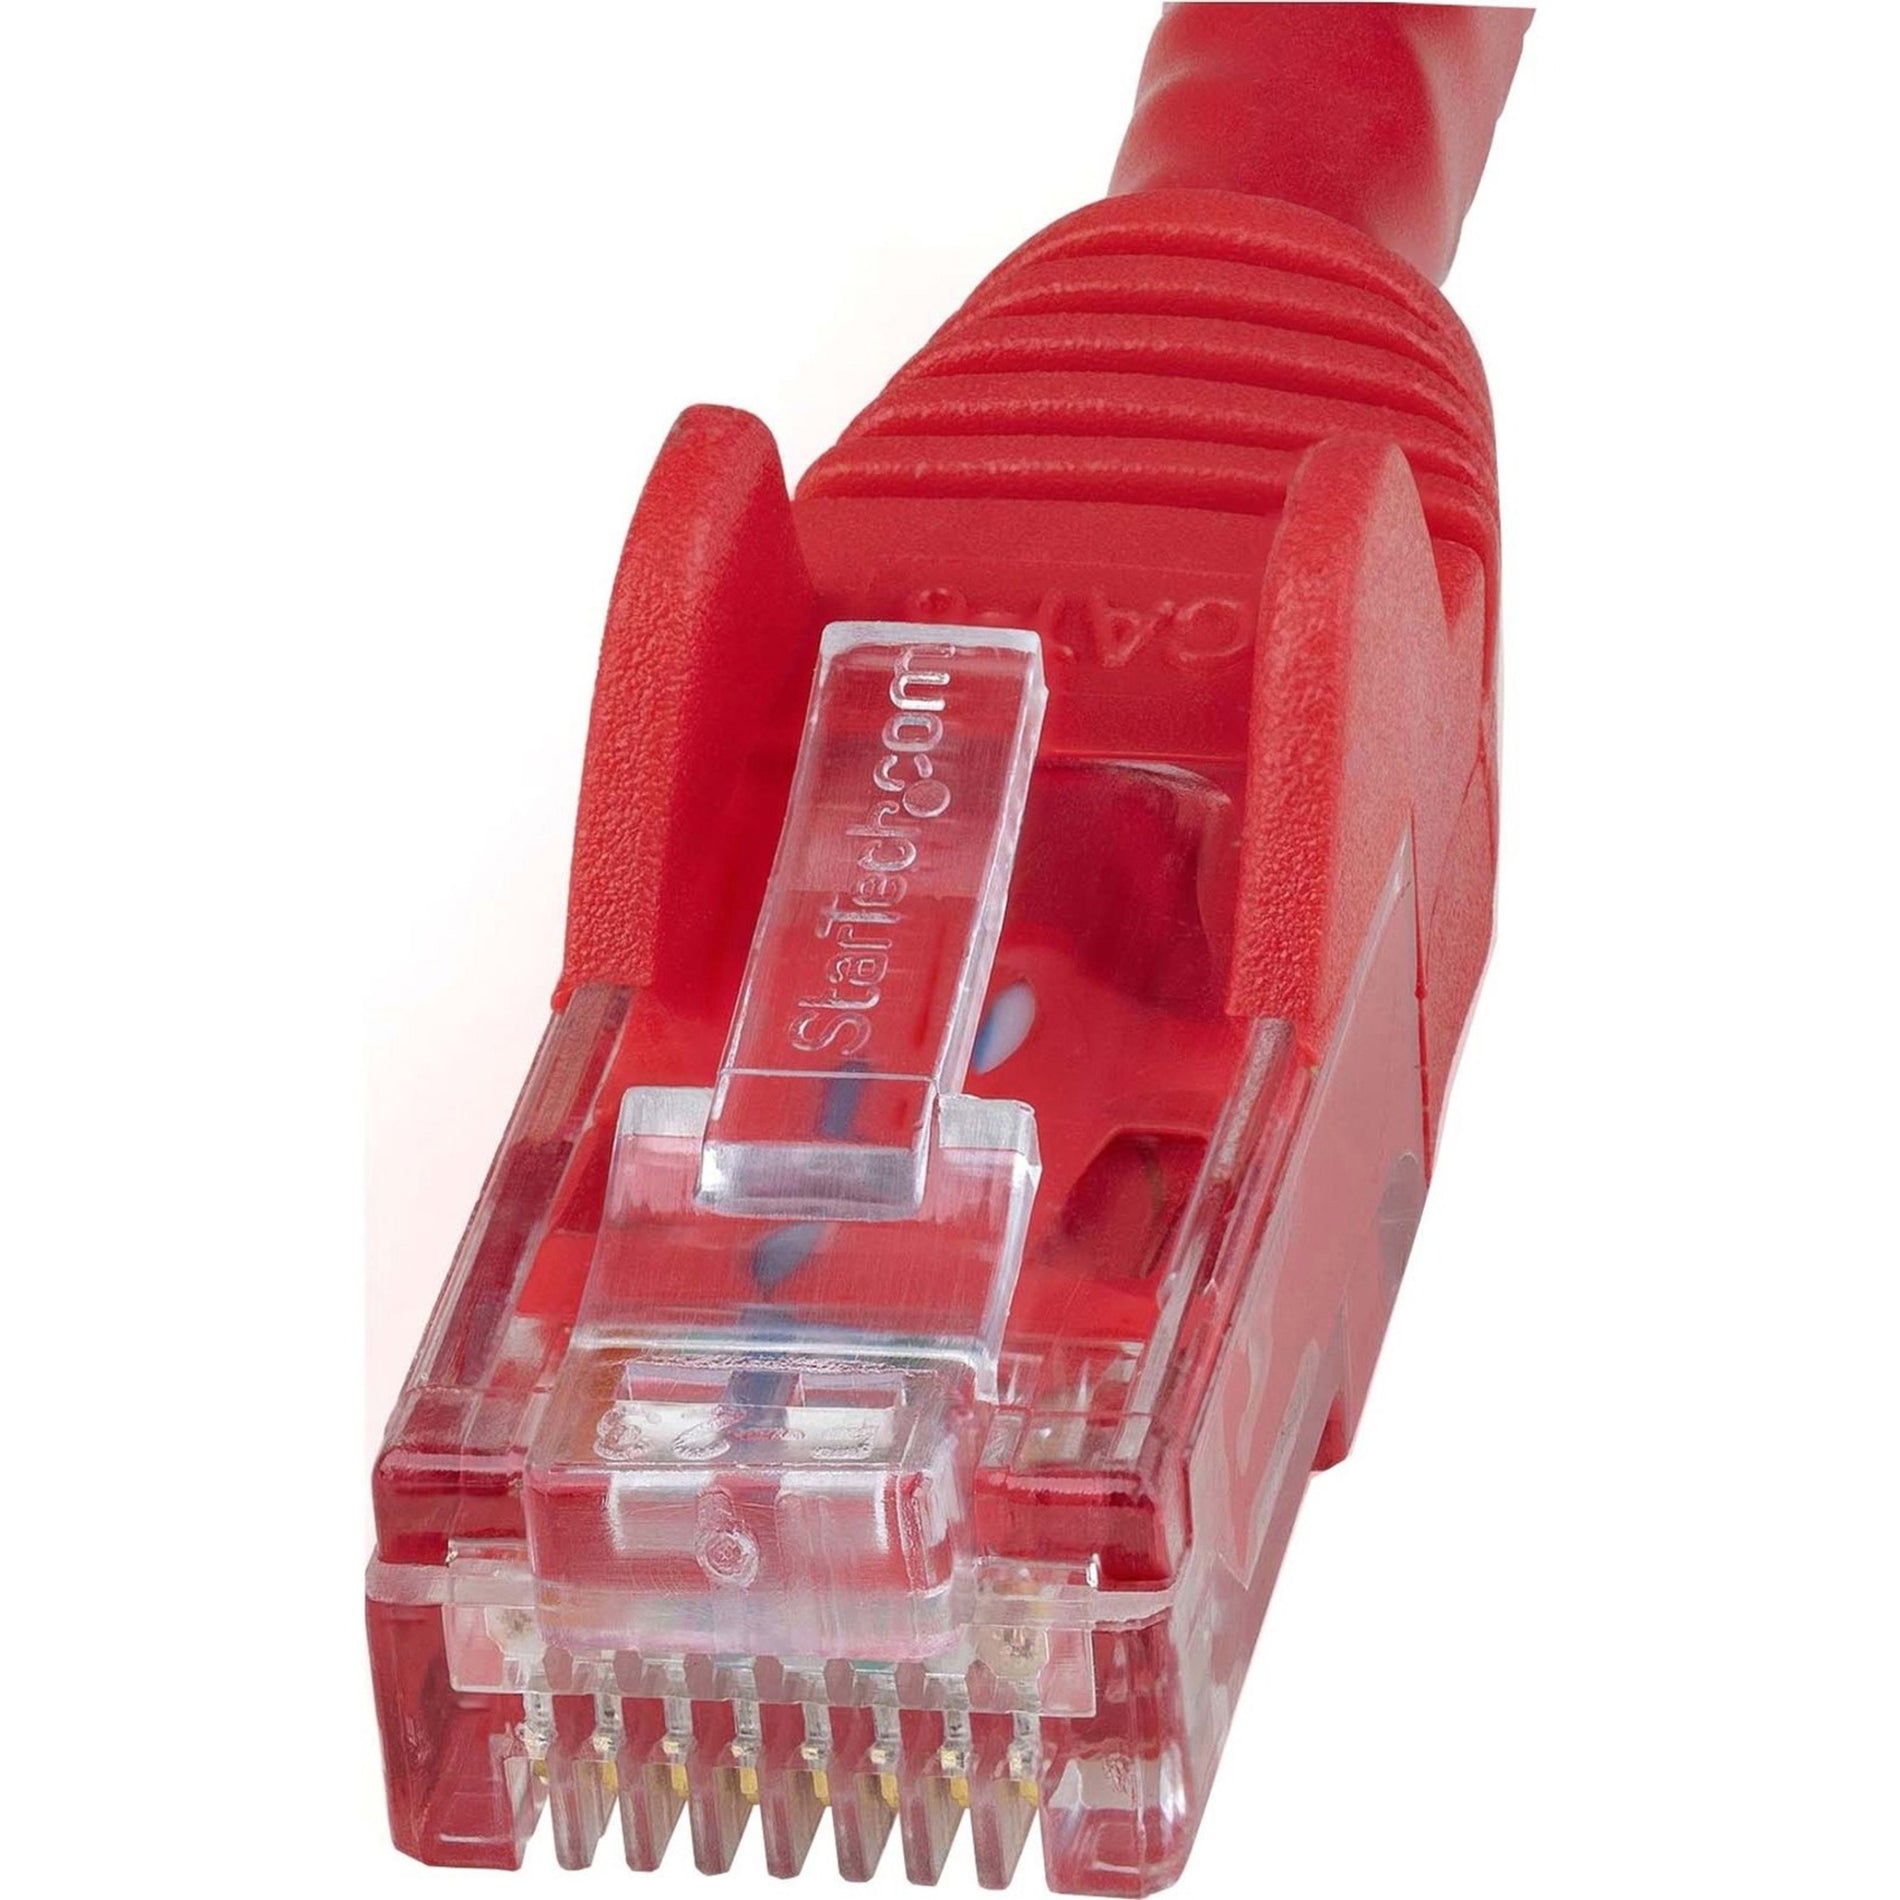 StarTech.com N6PATCH4RD Cat6 Patch Cable, 4ft Red Ethernet Cable, Snagless RJ45 Connectors